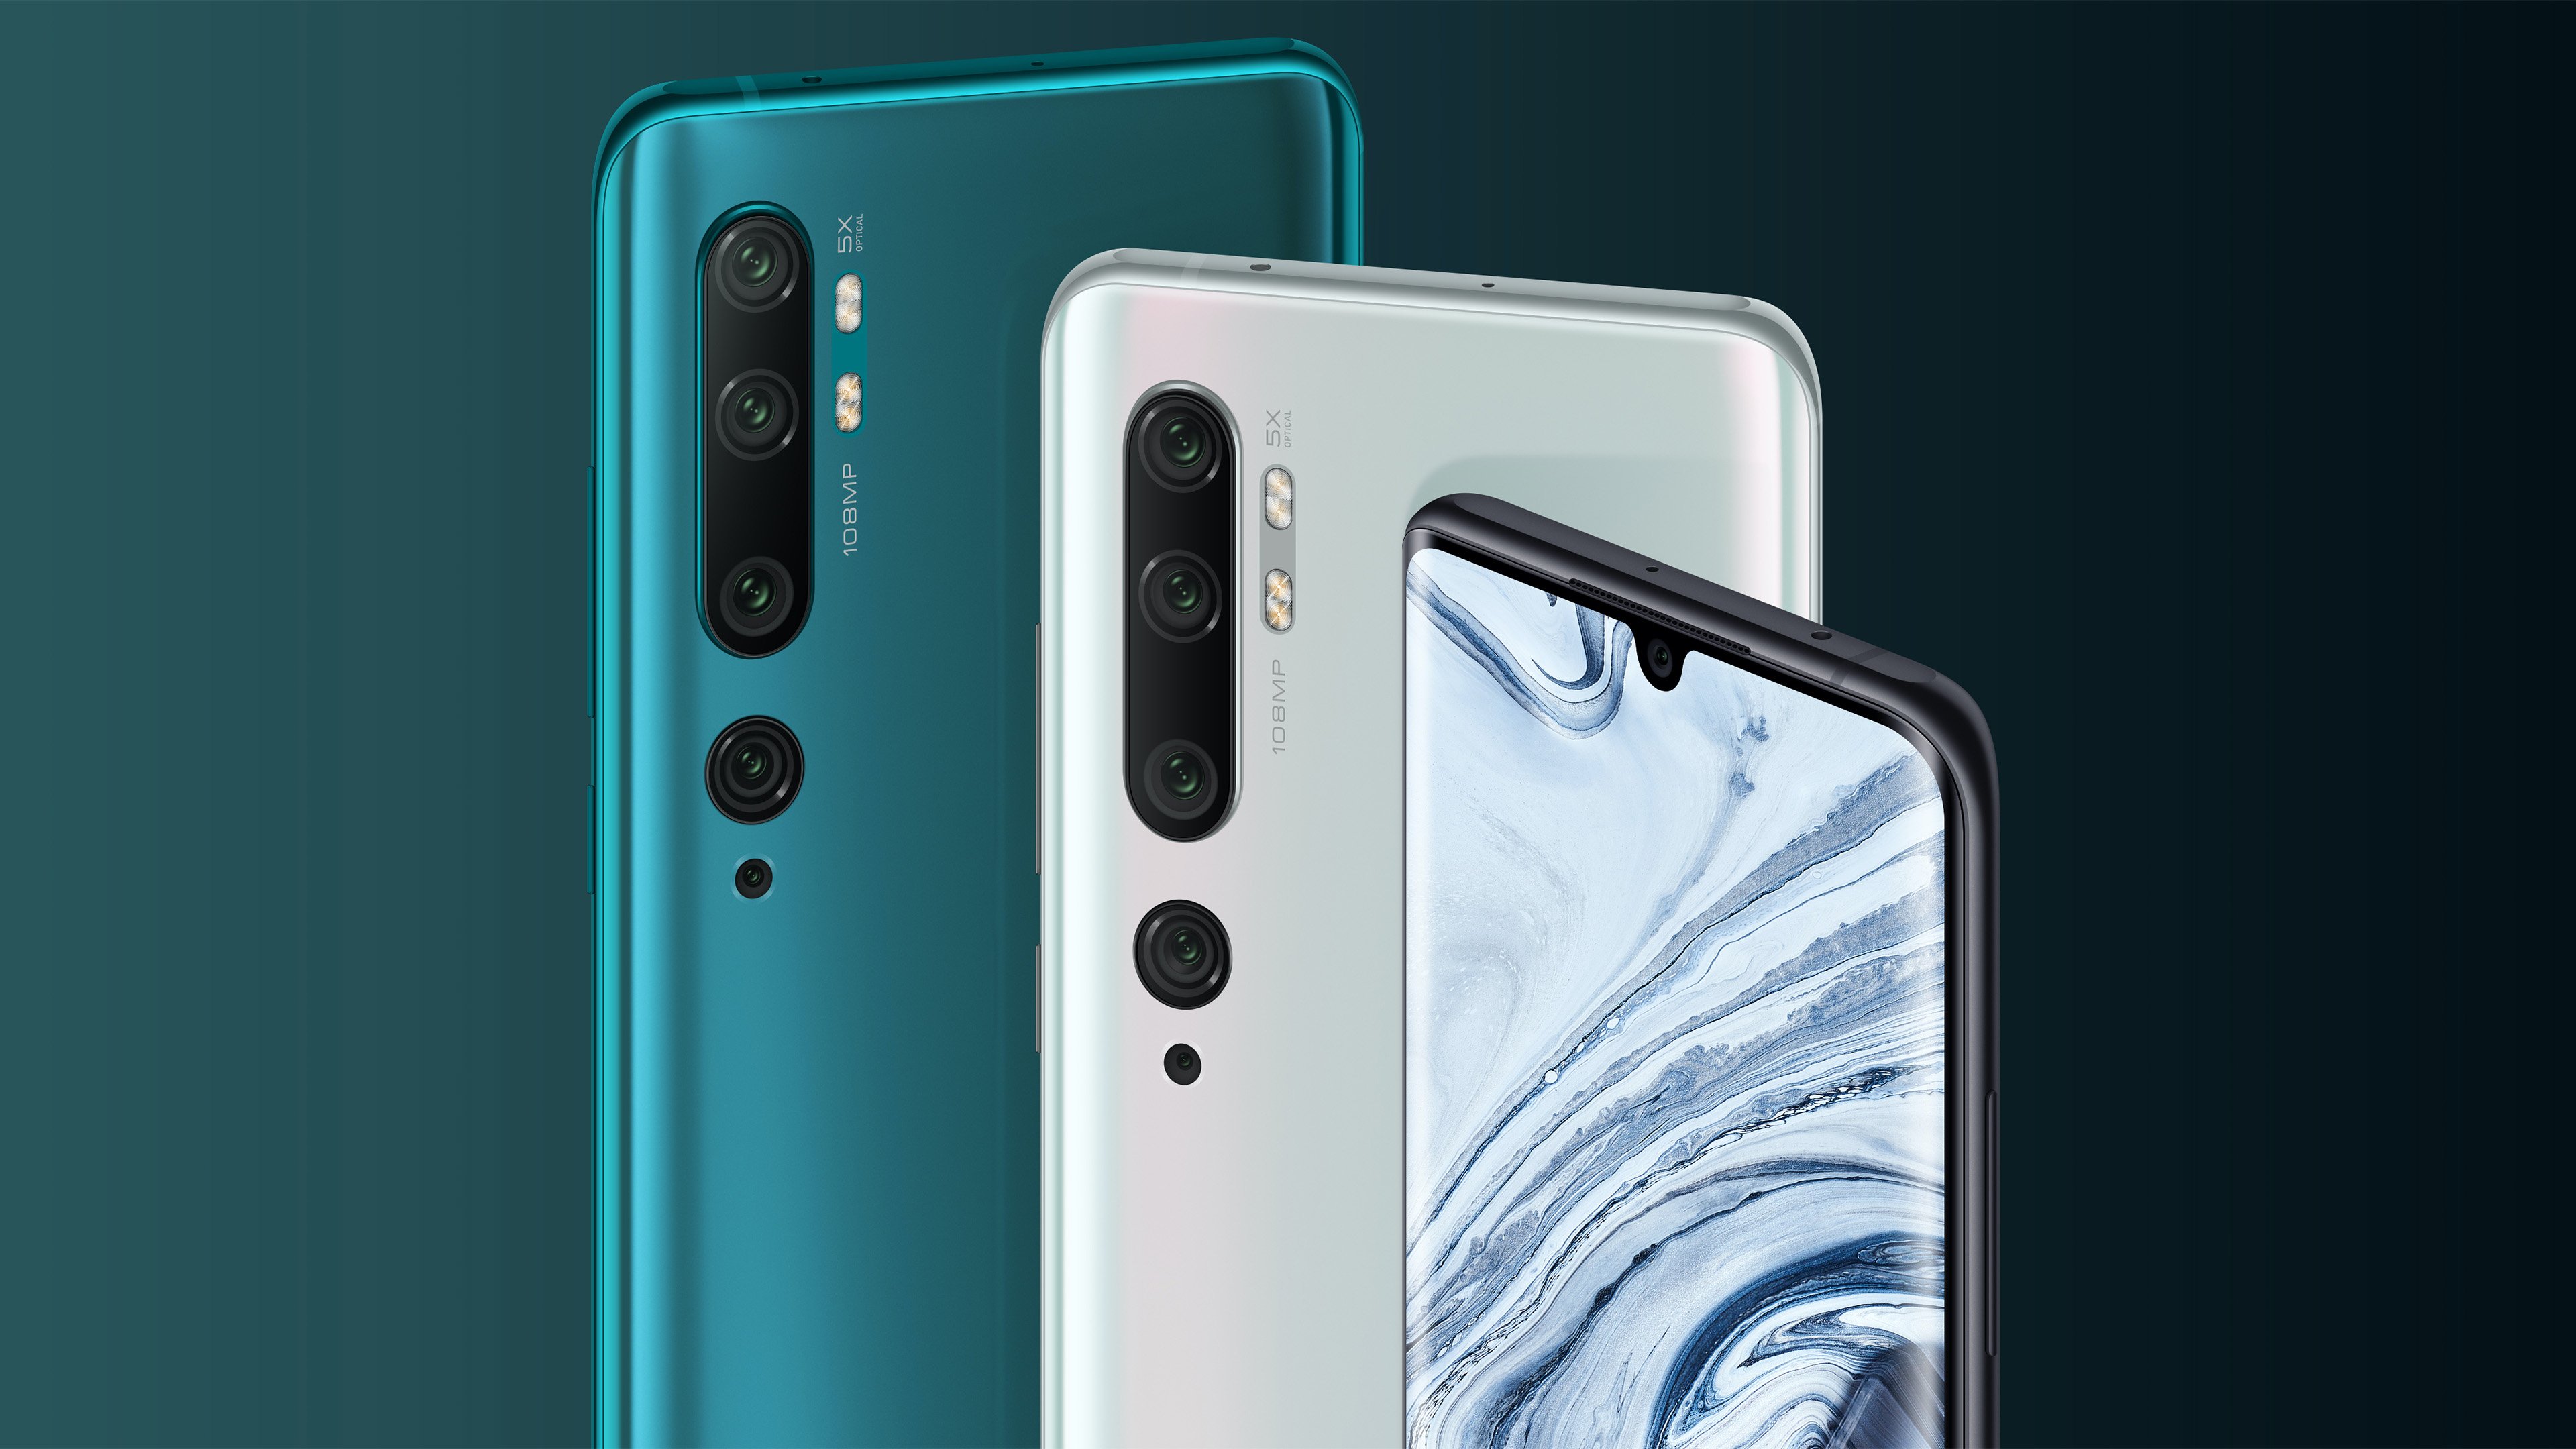 Is a 108 megapixel camera in Xiaomi Mi  Note 10 really 